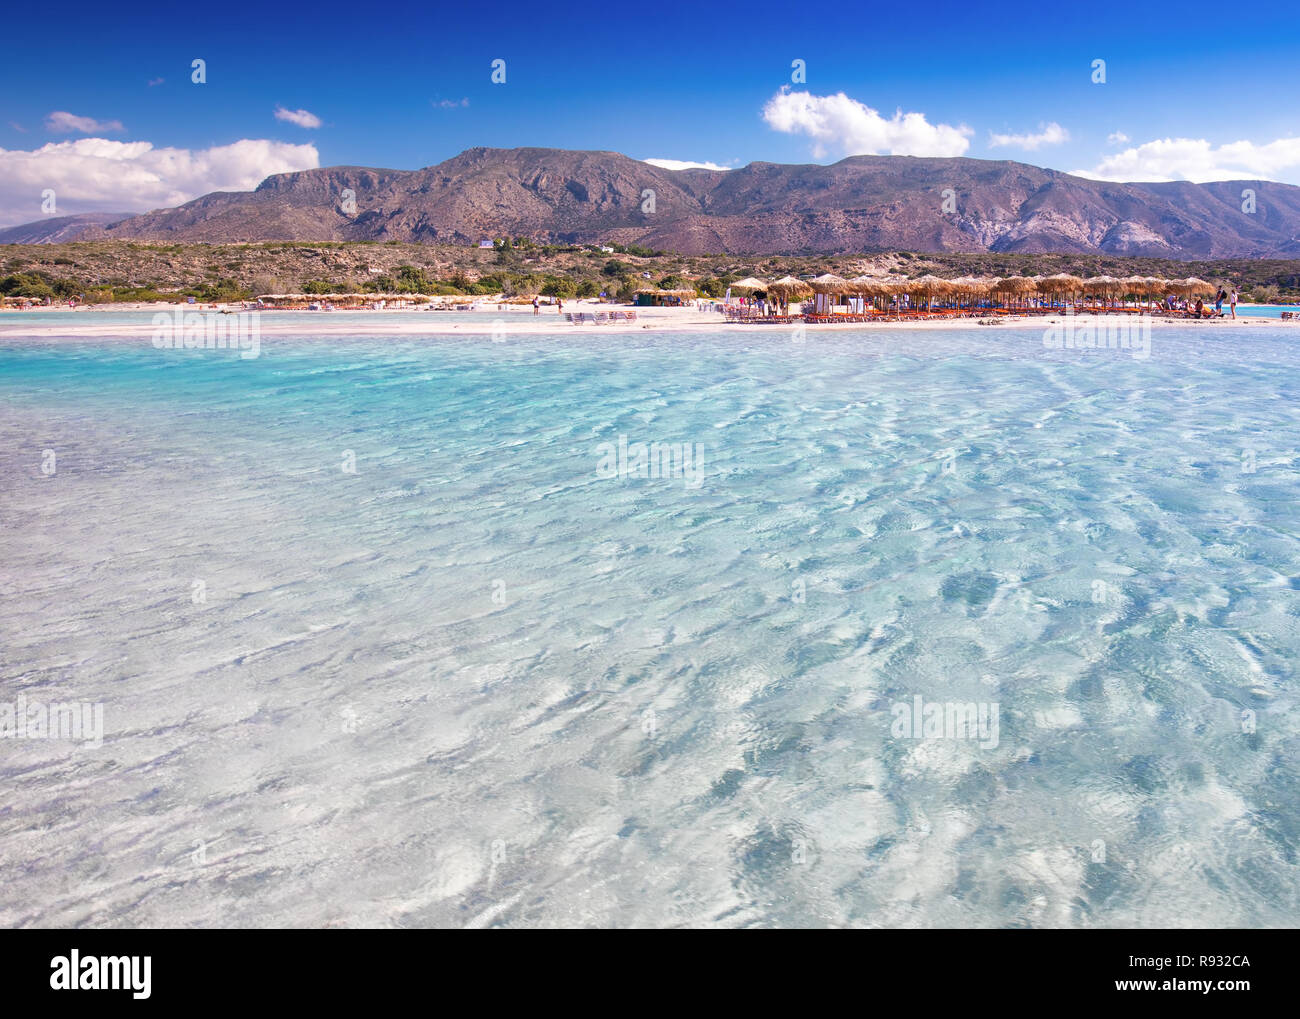 Elafonissi beach on Crete island with azure clear water, Greece, Europe. Crete is the largest and most populous of the Greek islands. Stock Photo